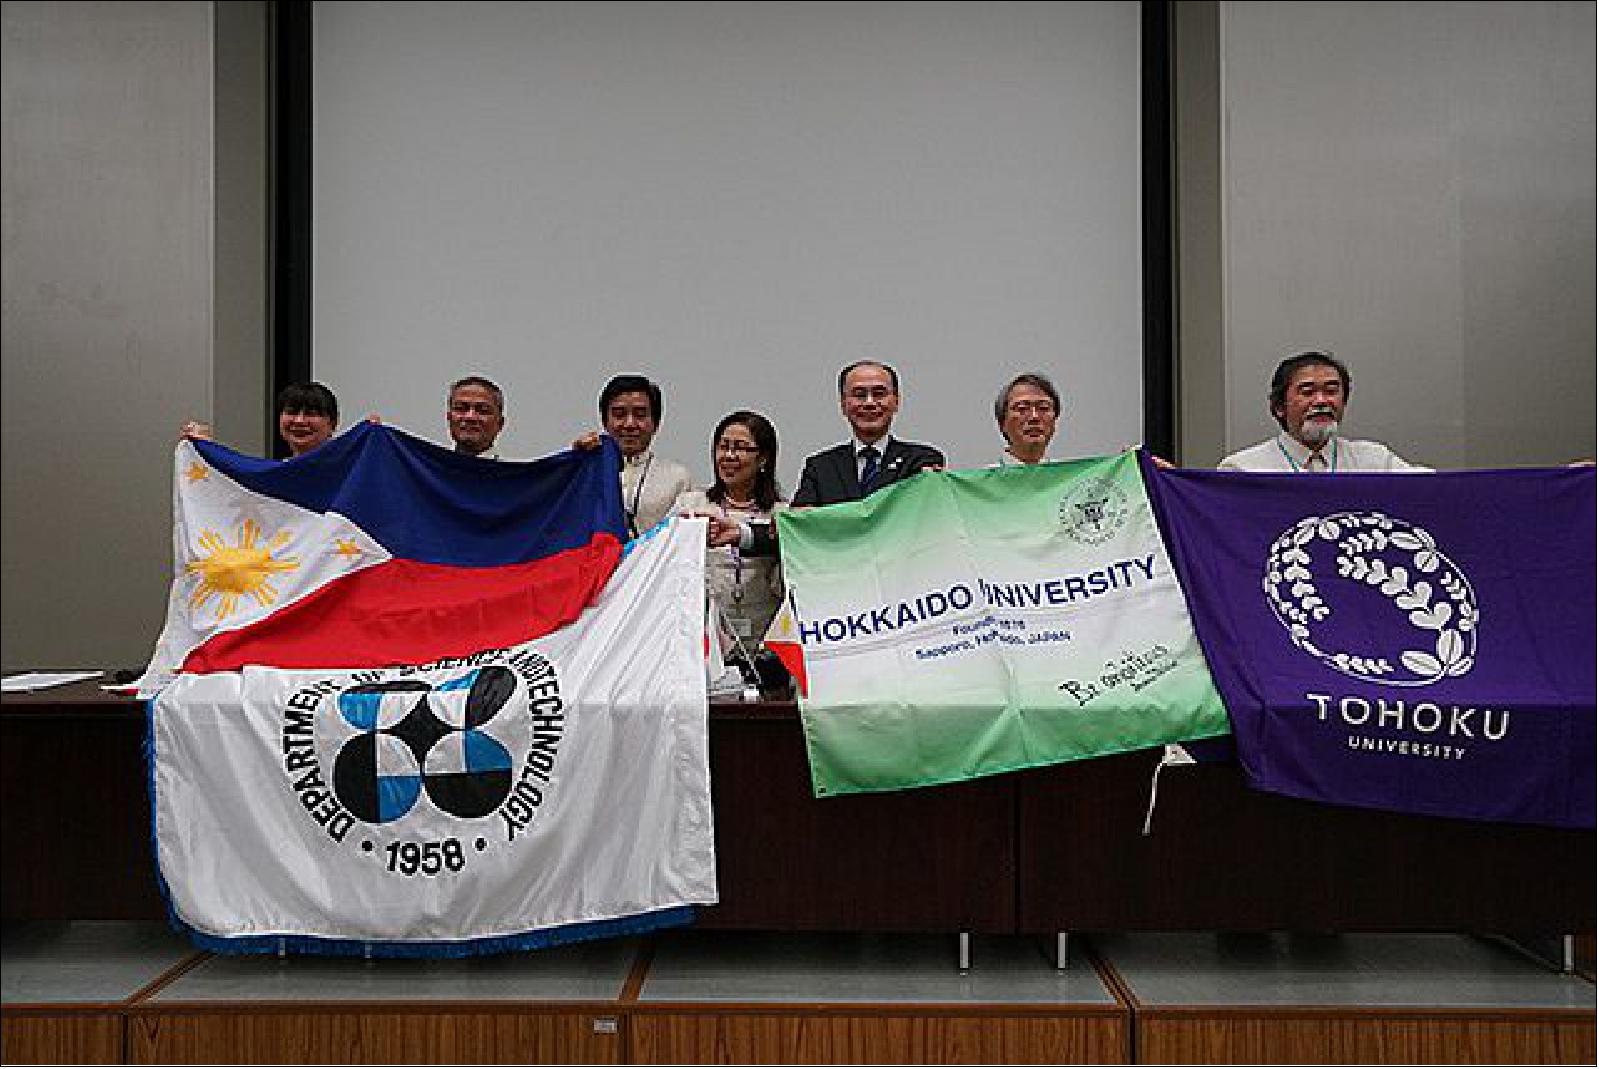 Figure 15: Commemorative photo of the microsatellite development parties [DOST (Department of Science and Technology) of the University of the Philippines, Hokkaido University and Tohoku University] at the JAXA press conference after the DIWATA-1 deployment (image credit: JAXA)